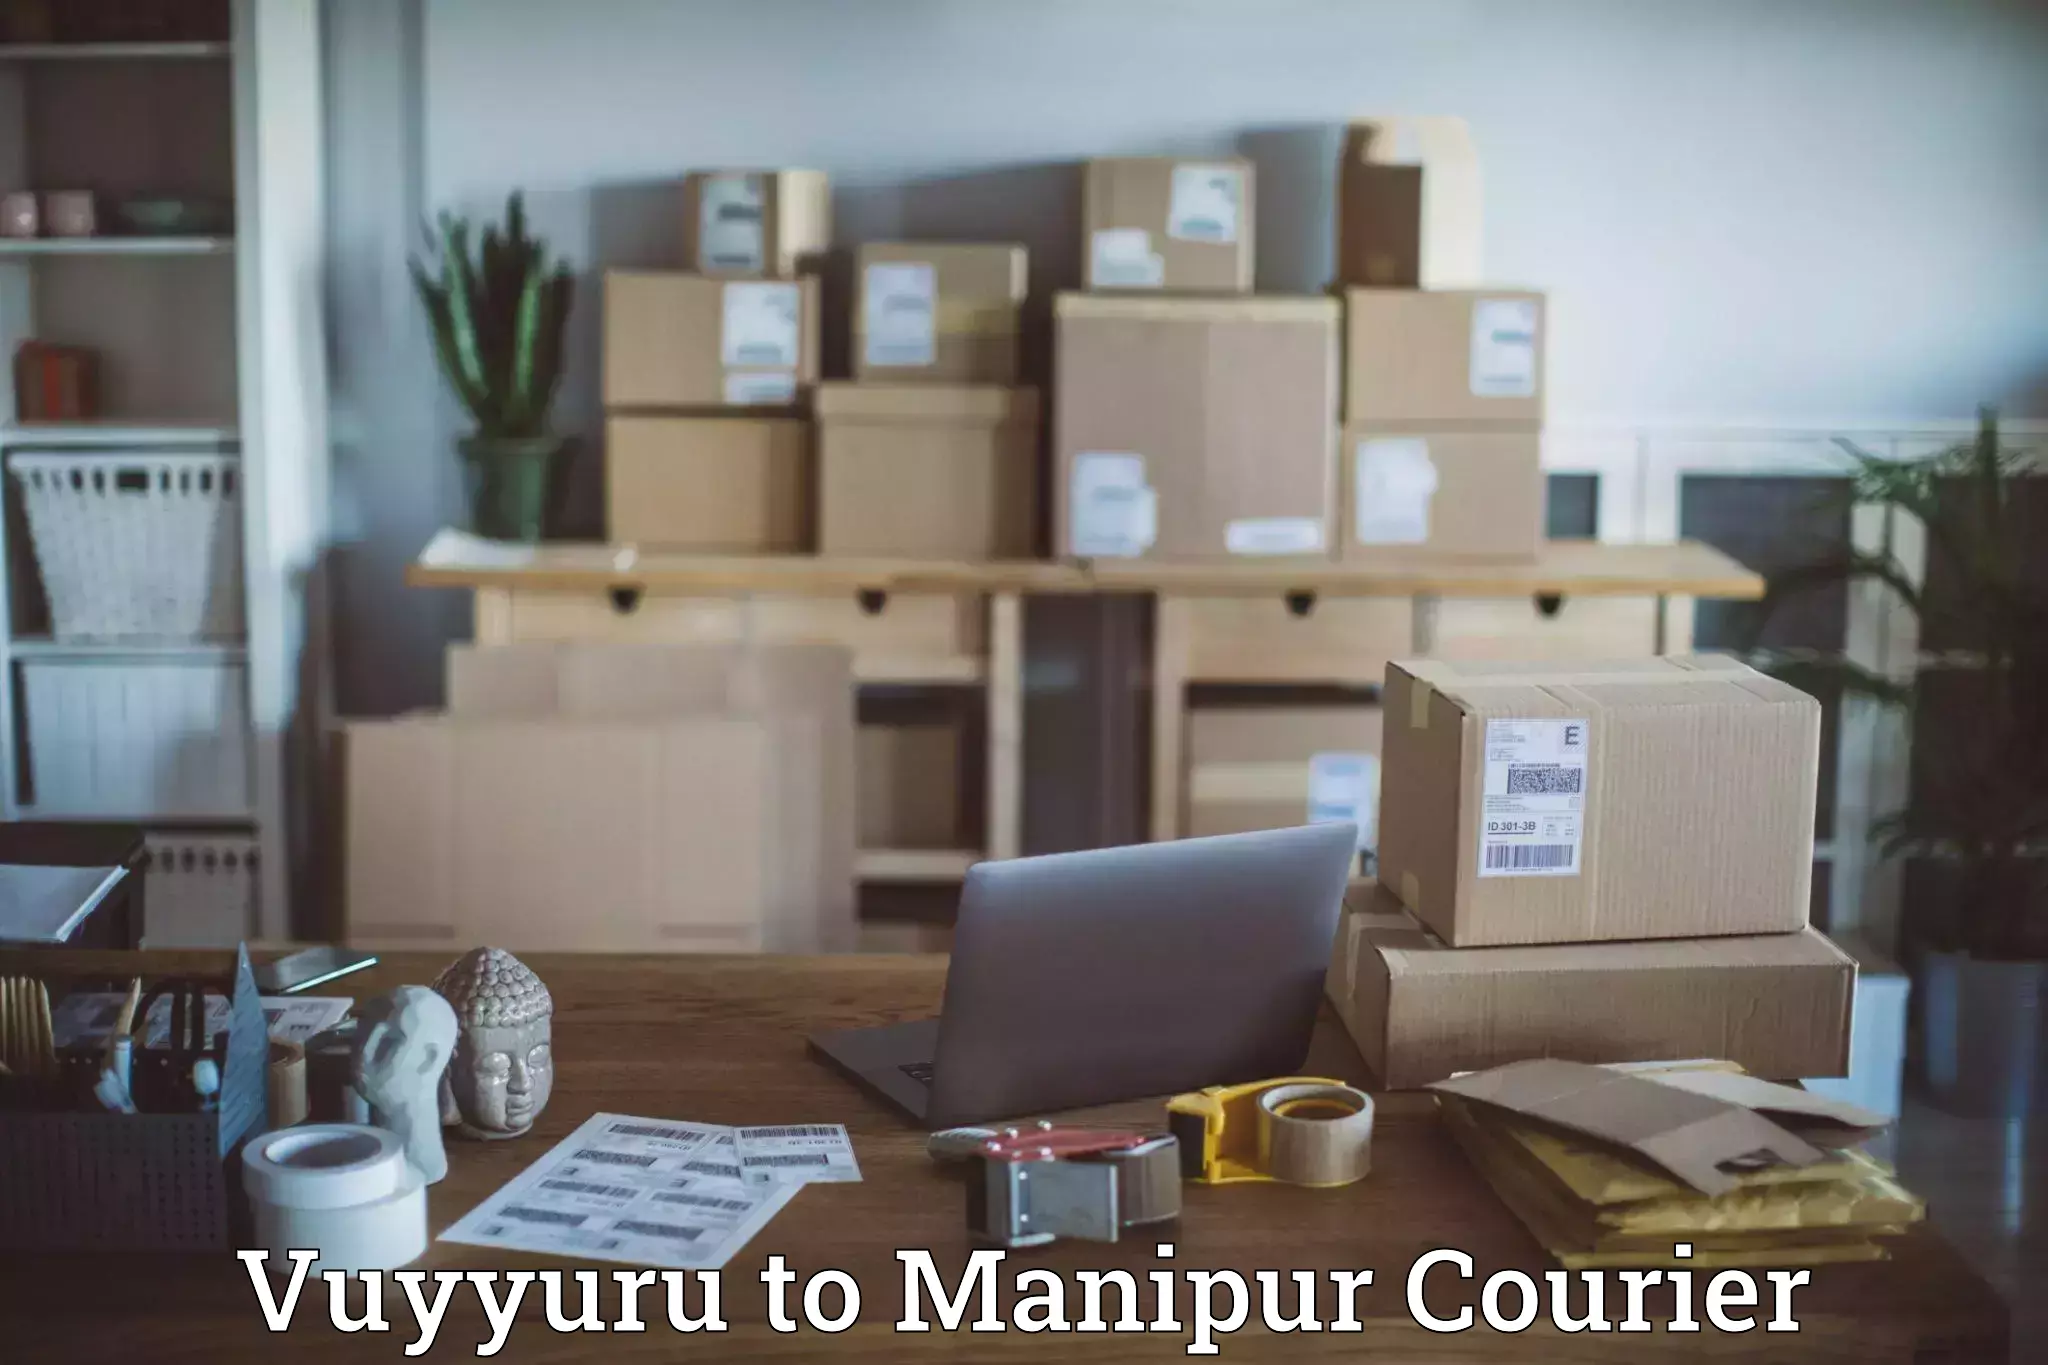 Customizable delivery plans Vuyyuru to Manipur